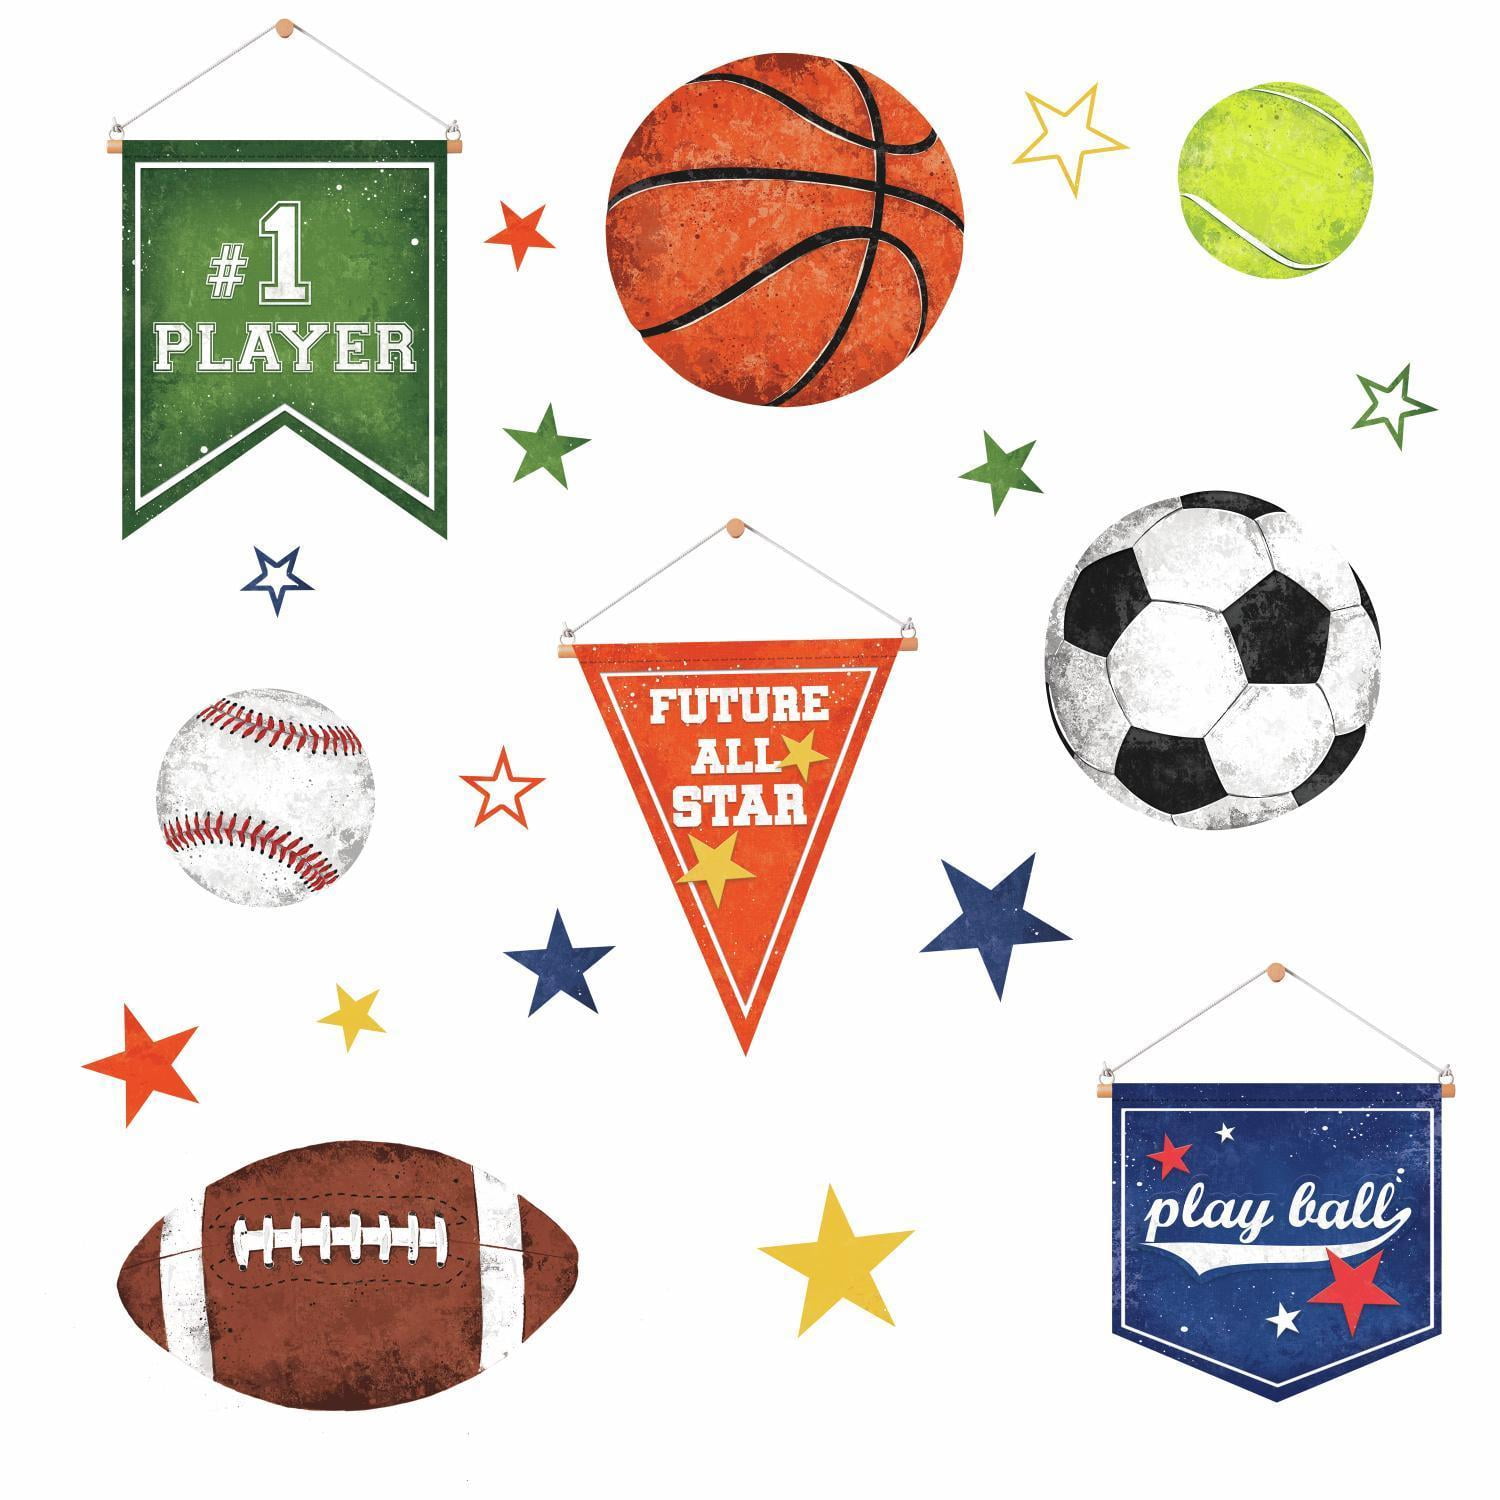 20 Soccer STICKERS Party Favors Supplies Birthday Treat Loot Bags Ball Sport